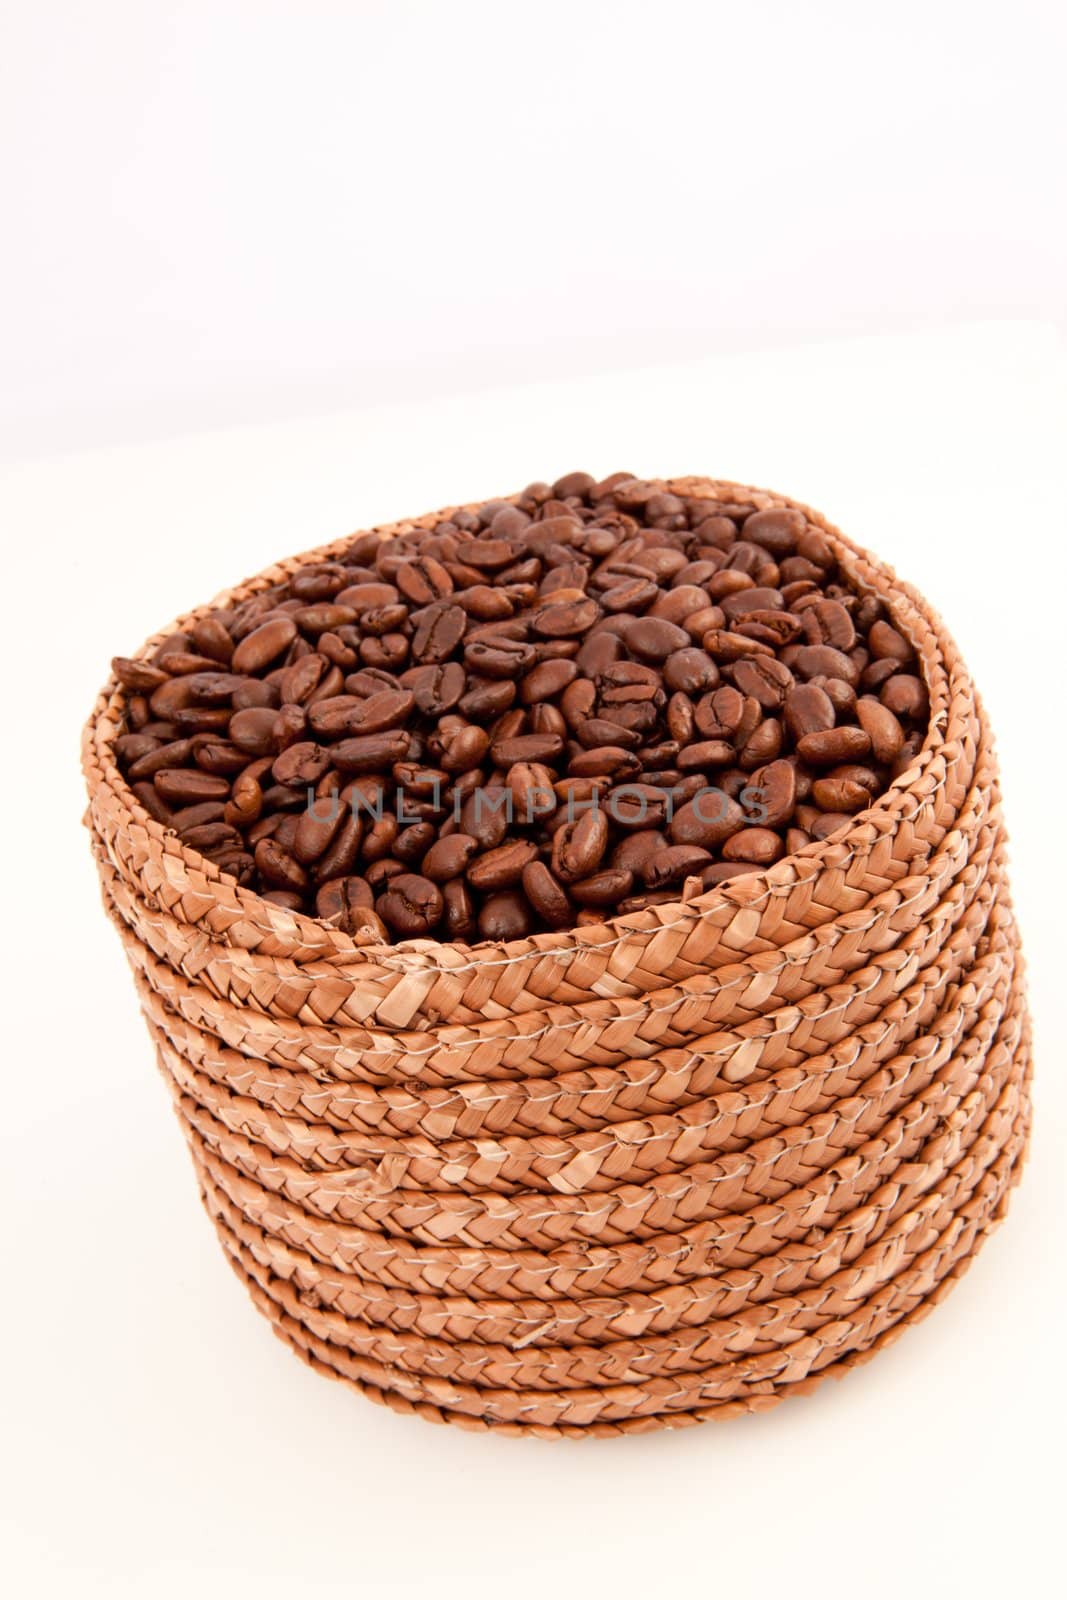 Close up of a basket full of coffee seeds by Wavebreakmedia